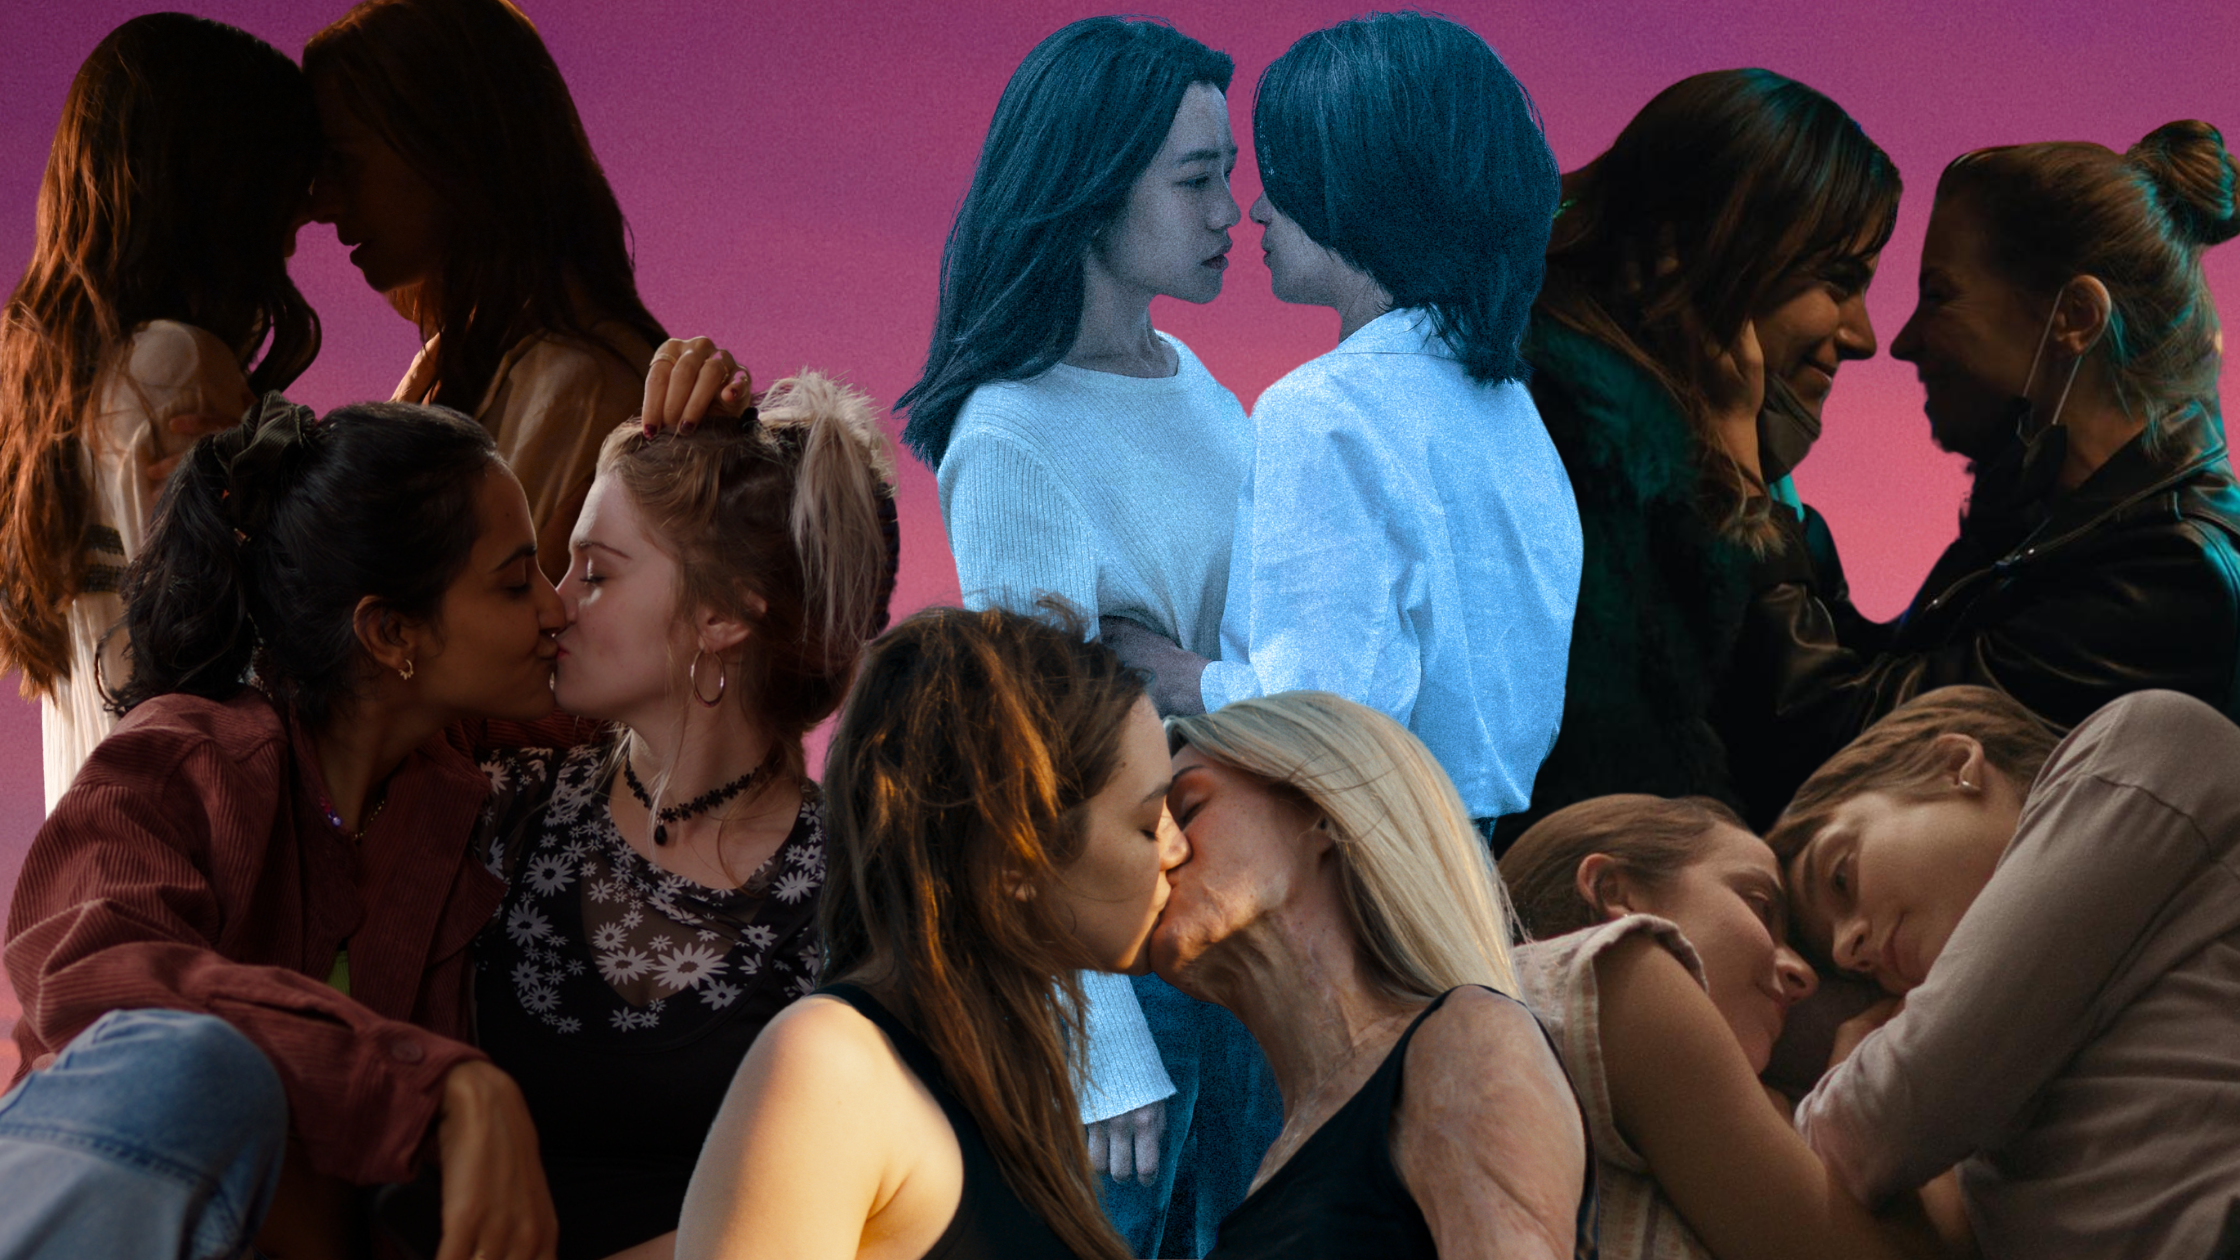 A collage of image from various films of women kissing or embracing